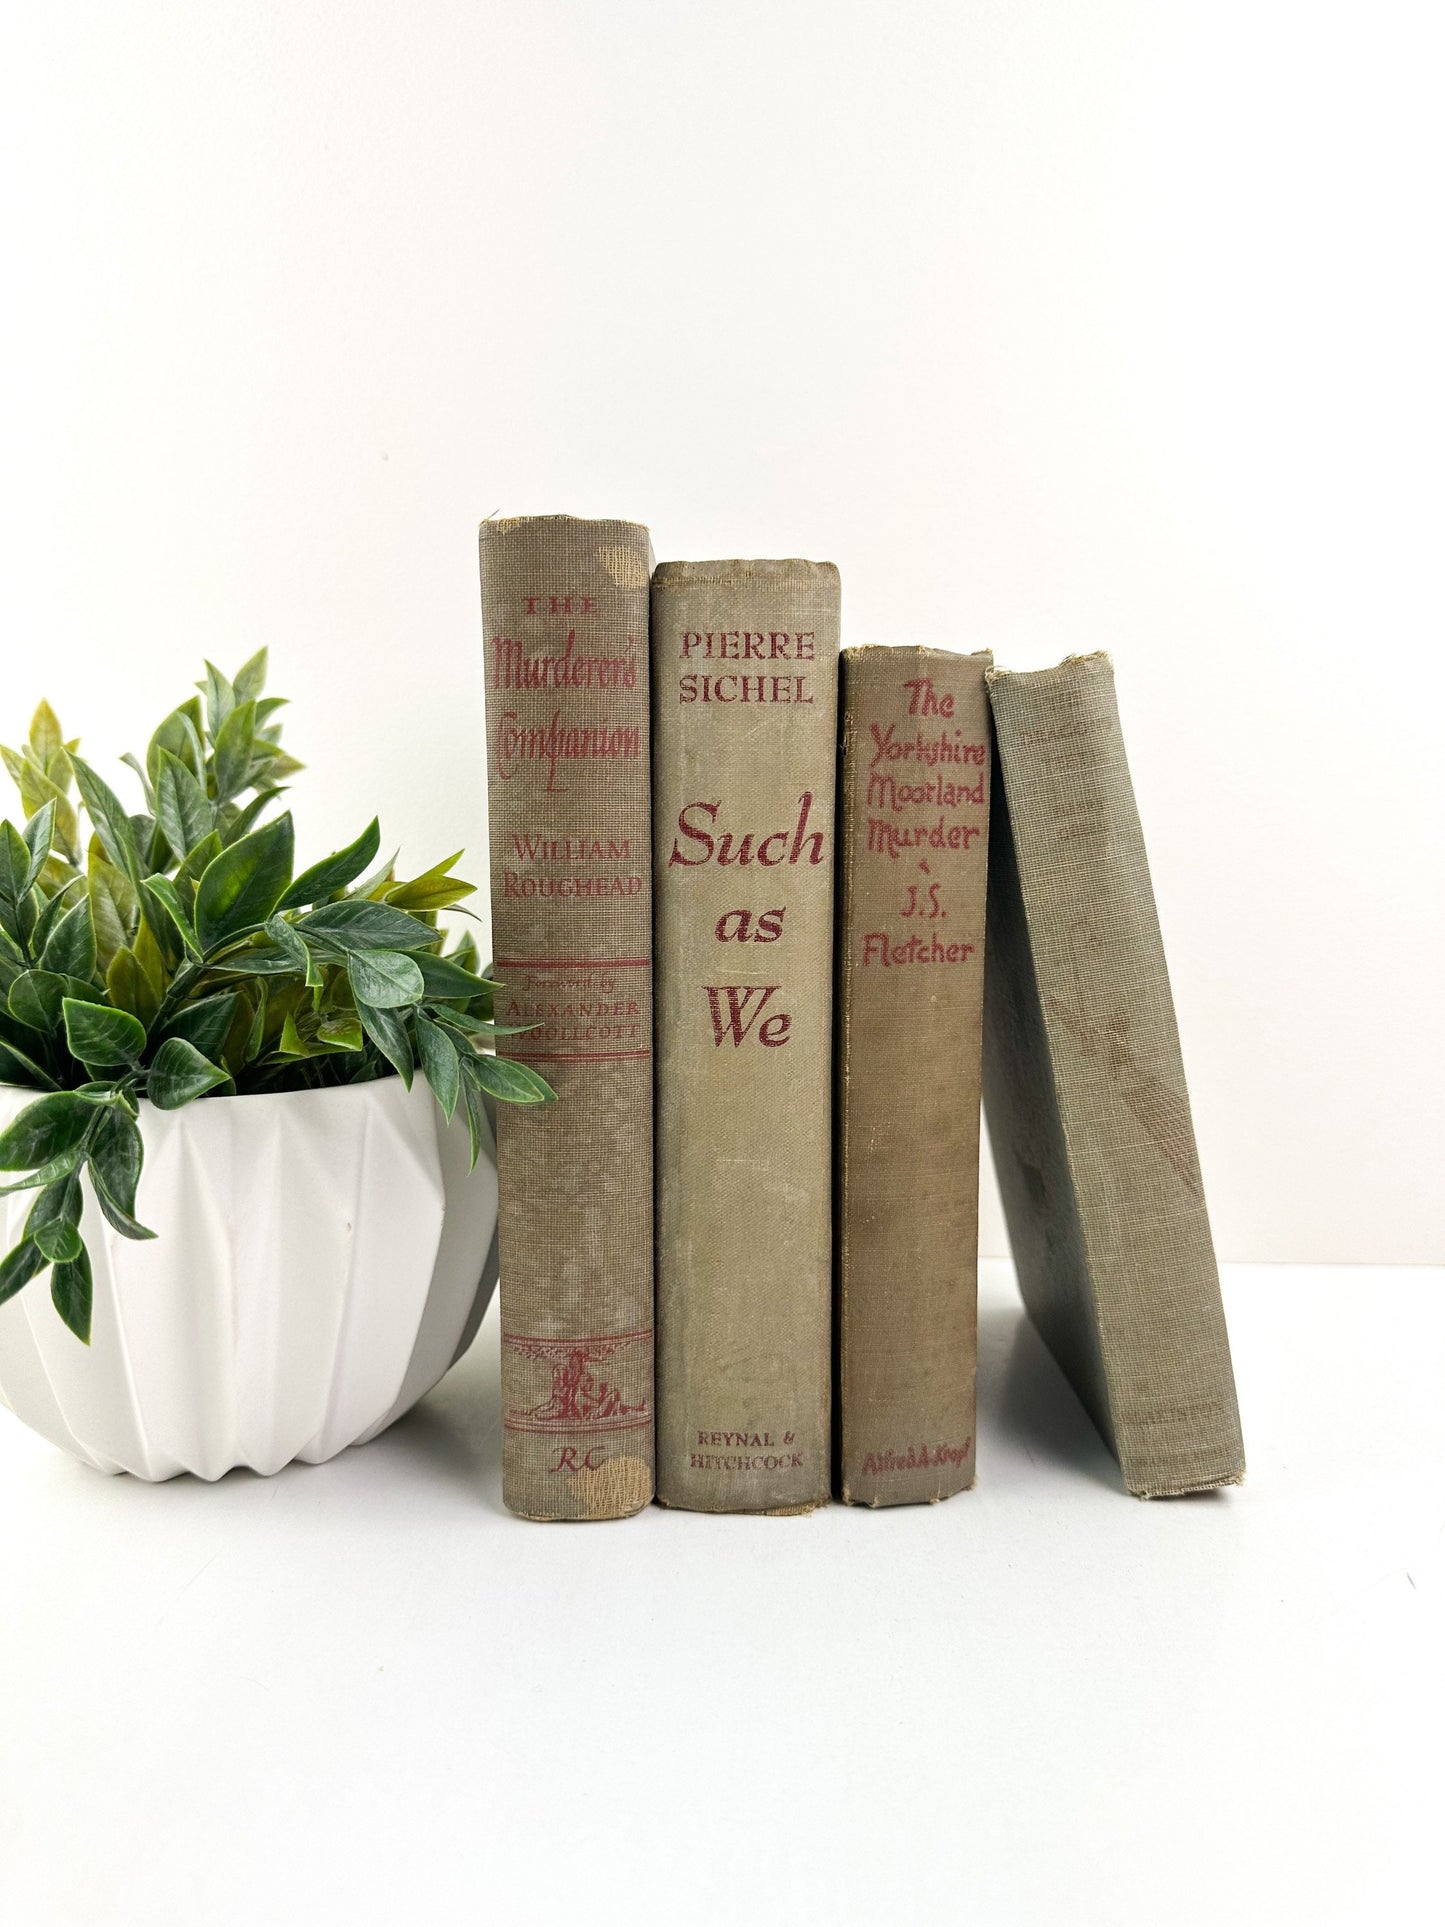 Book Decor, Vintage Books for Table Decor, Book Stack, Books by Color